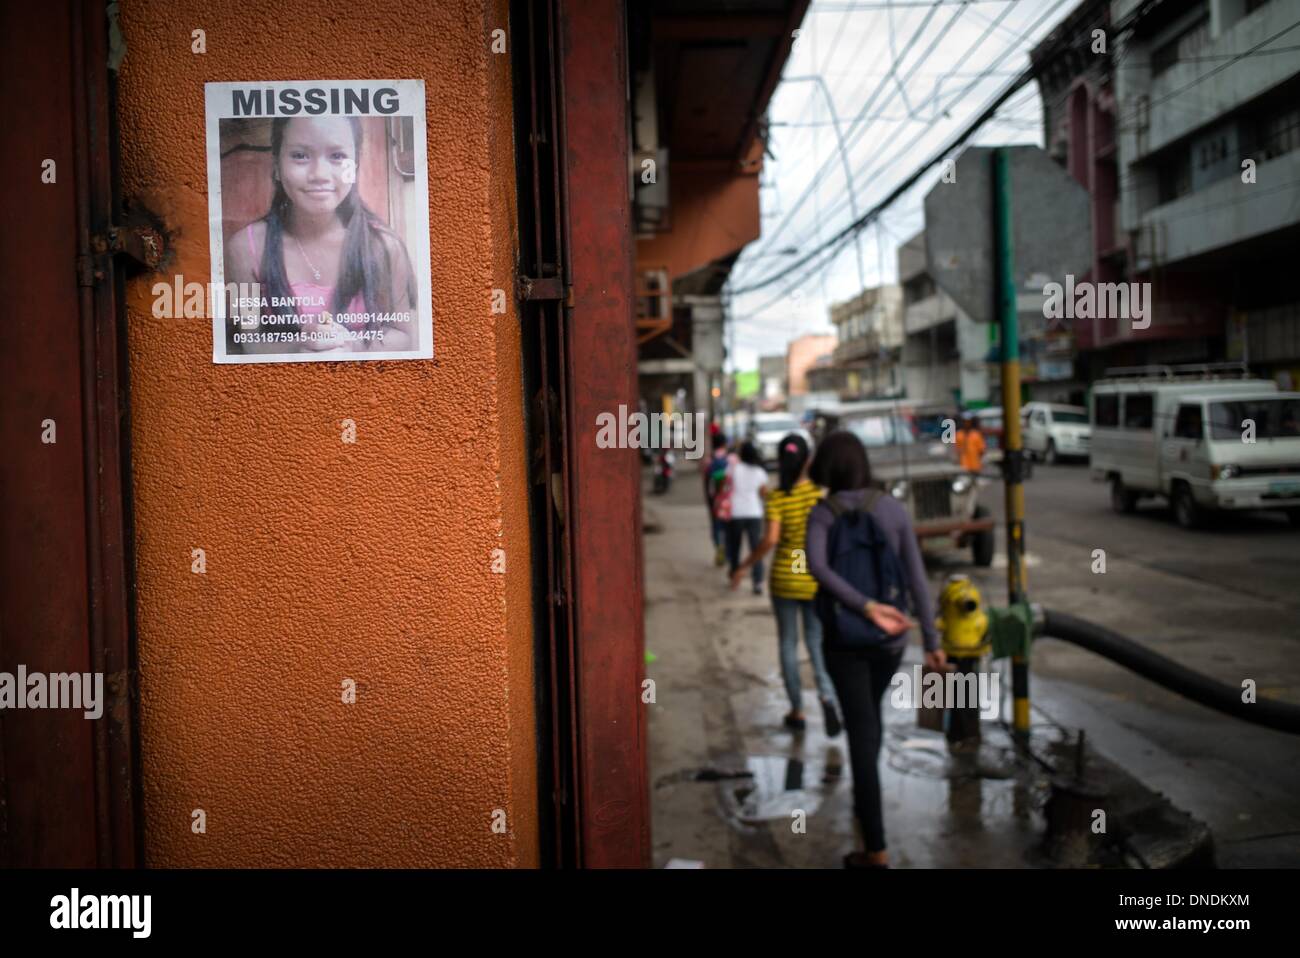 Tacloban, Leyete, Philippines. 23rd Dec, 2013. A poster of a missing person is pasted on the walls of the local shop downtown Tacloban.One of the most ferocious typhoons to hit the Philippines, Haiyan left more than 6,000 people dead and nearly 1,800 others missing. It damaged or swept away more than 1.1m houses and injured more than 27,000 people.More than 4 million people were displaced, with about 101,000 remaining in 300 emergency shelters in central provinces. Credit:  Agron Dragaj/ZUMAPRESS.com/Alamy Live News Stock Photo